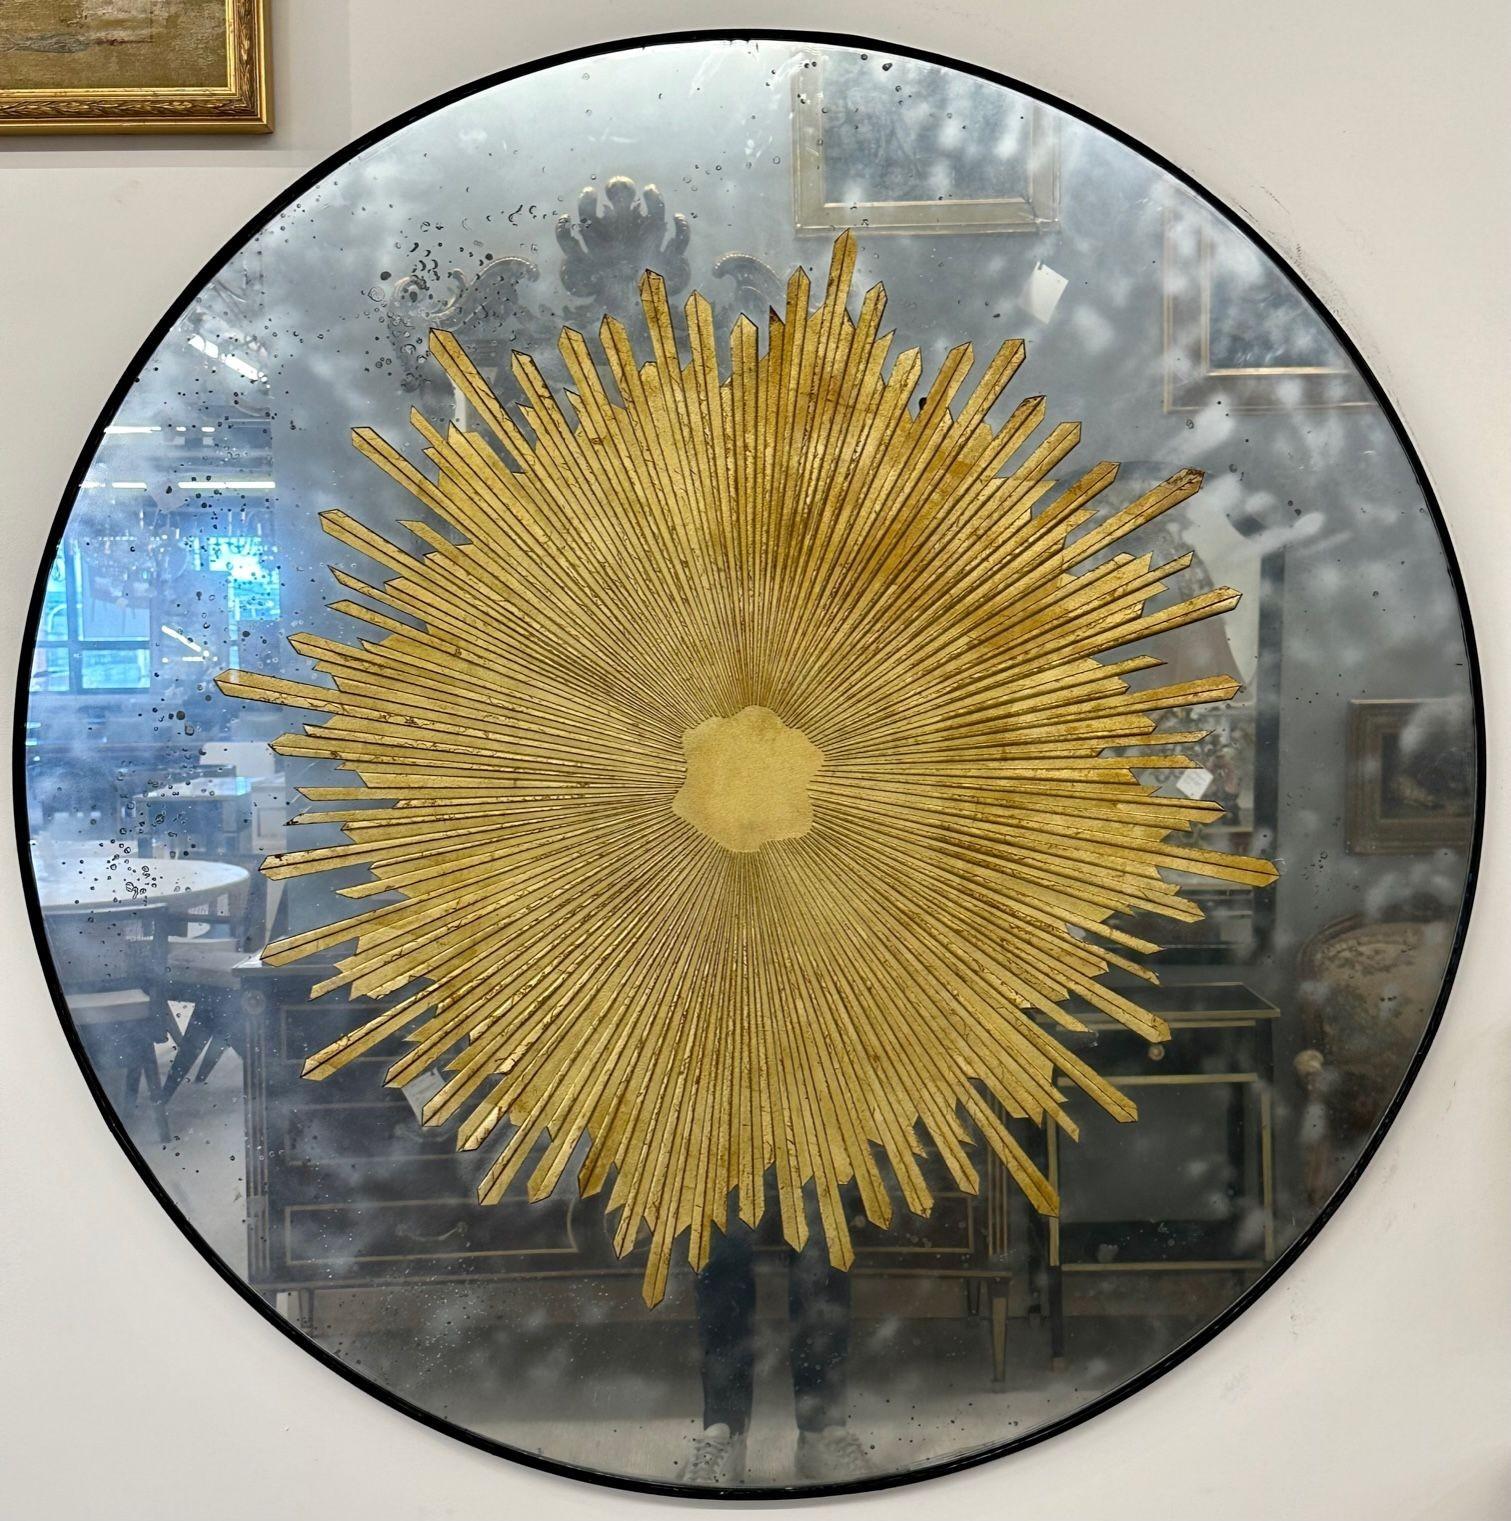 Contemporary, Hollywood Regency Style, Sunburst Mirrors, Distressed Glass, 2024

A pair of carved gilt gold and silver glass wall mirrors. Each mirror is handmade here in the United States. The gilt gold sunburst motif is clayed and etched into the